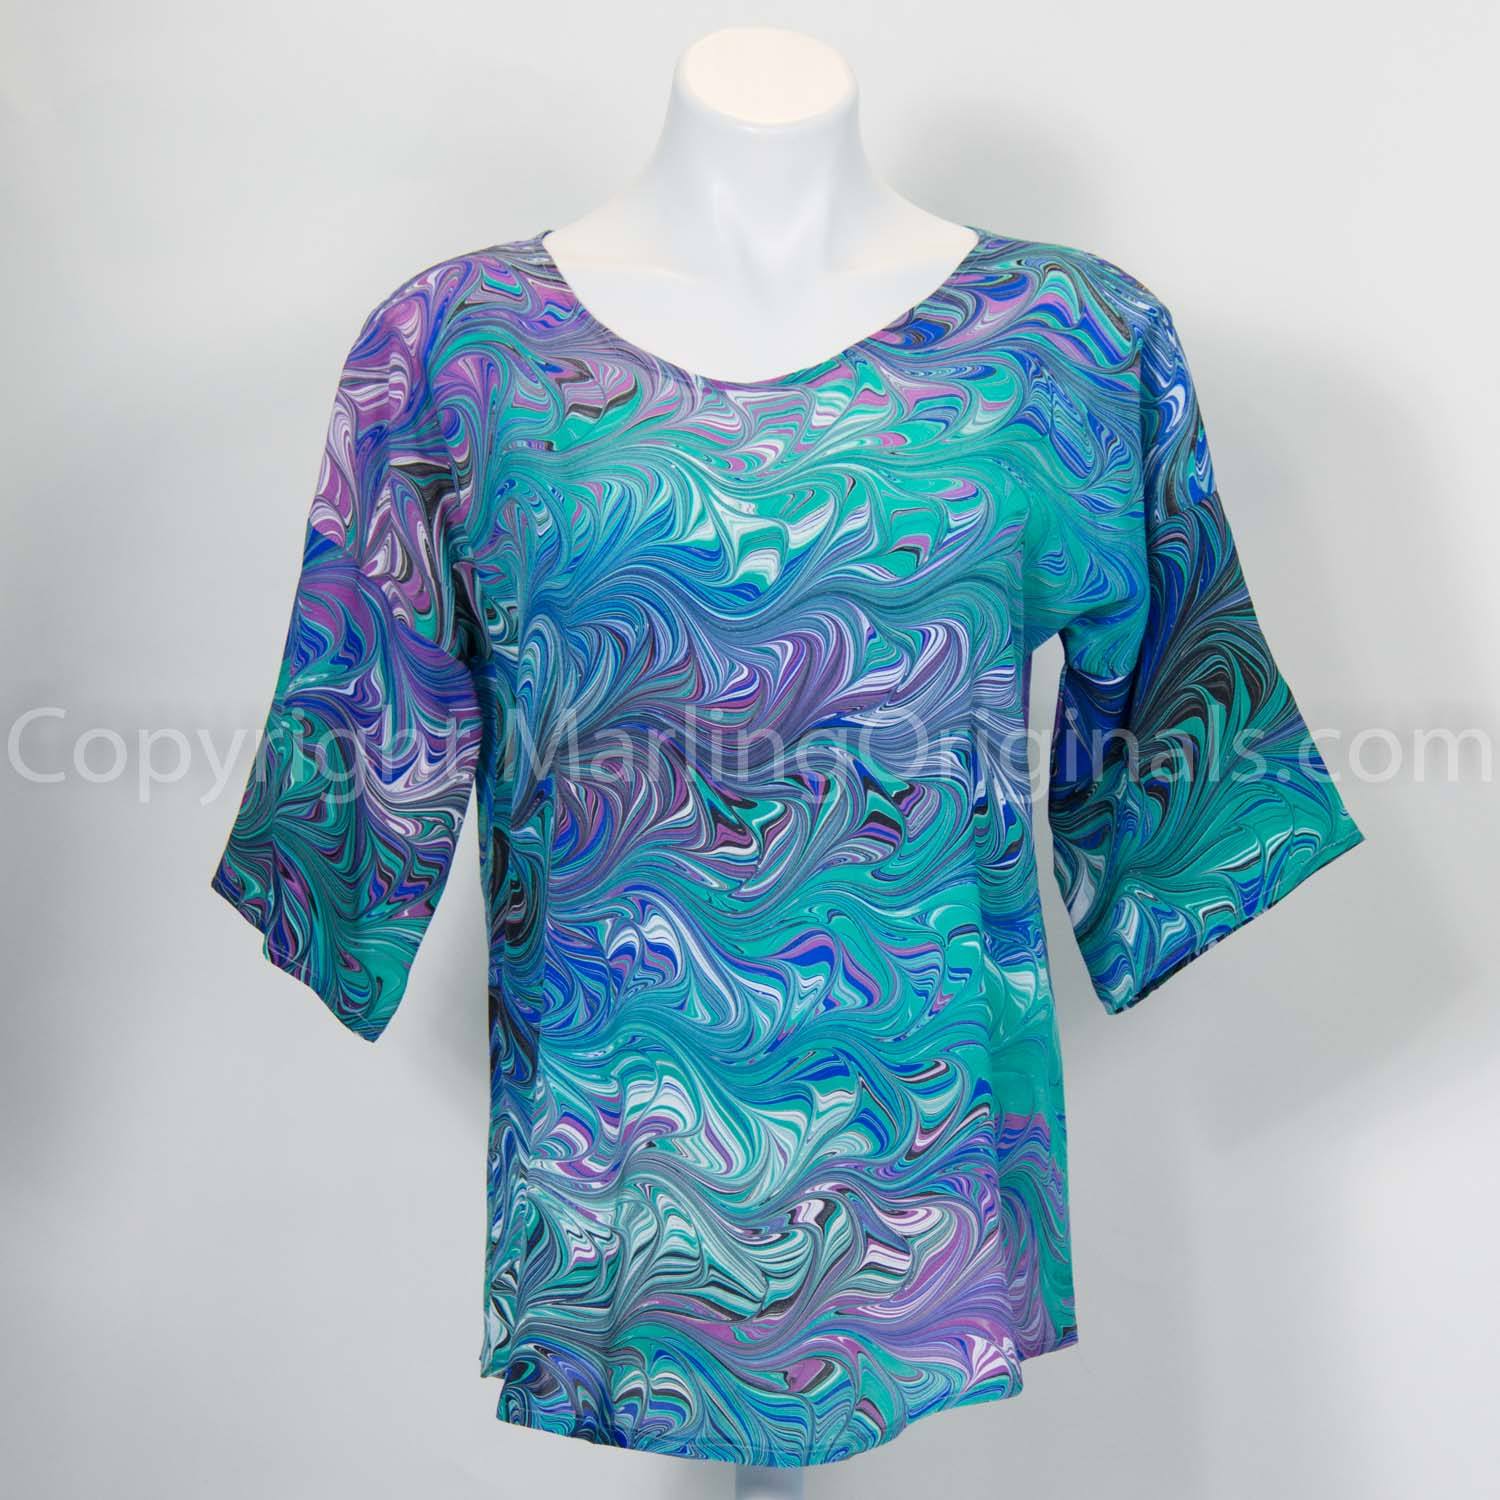 marbled blue silk top with round neck, half sleeve and curved hemline